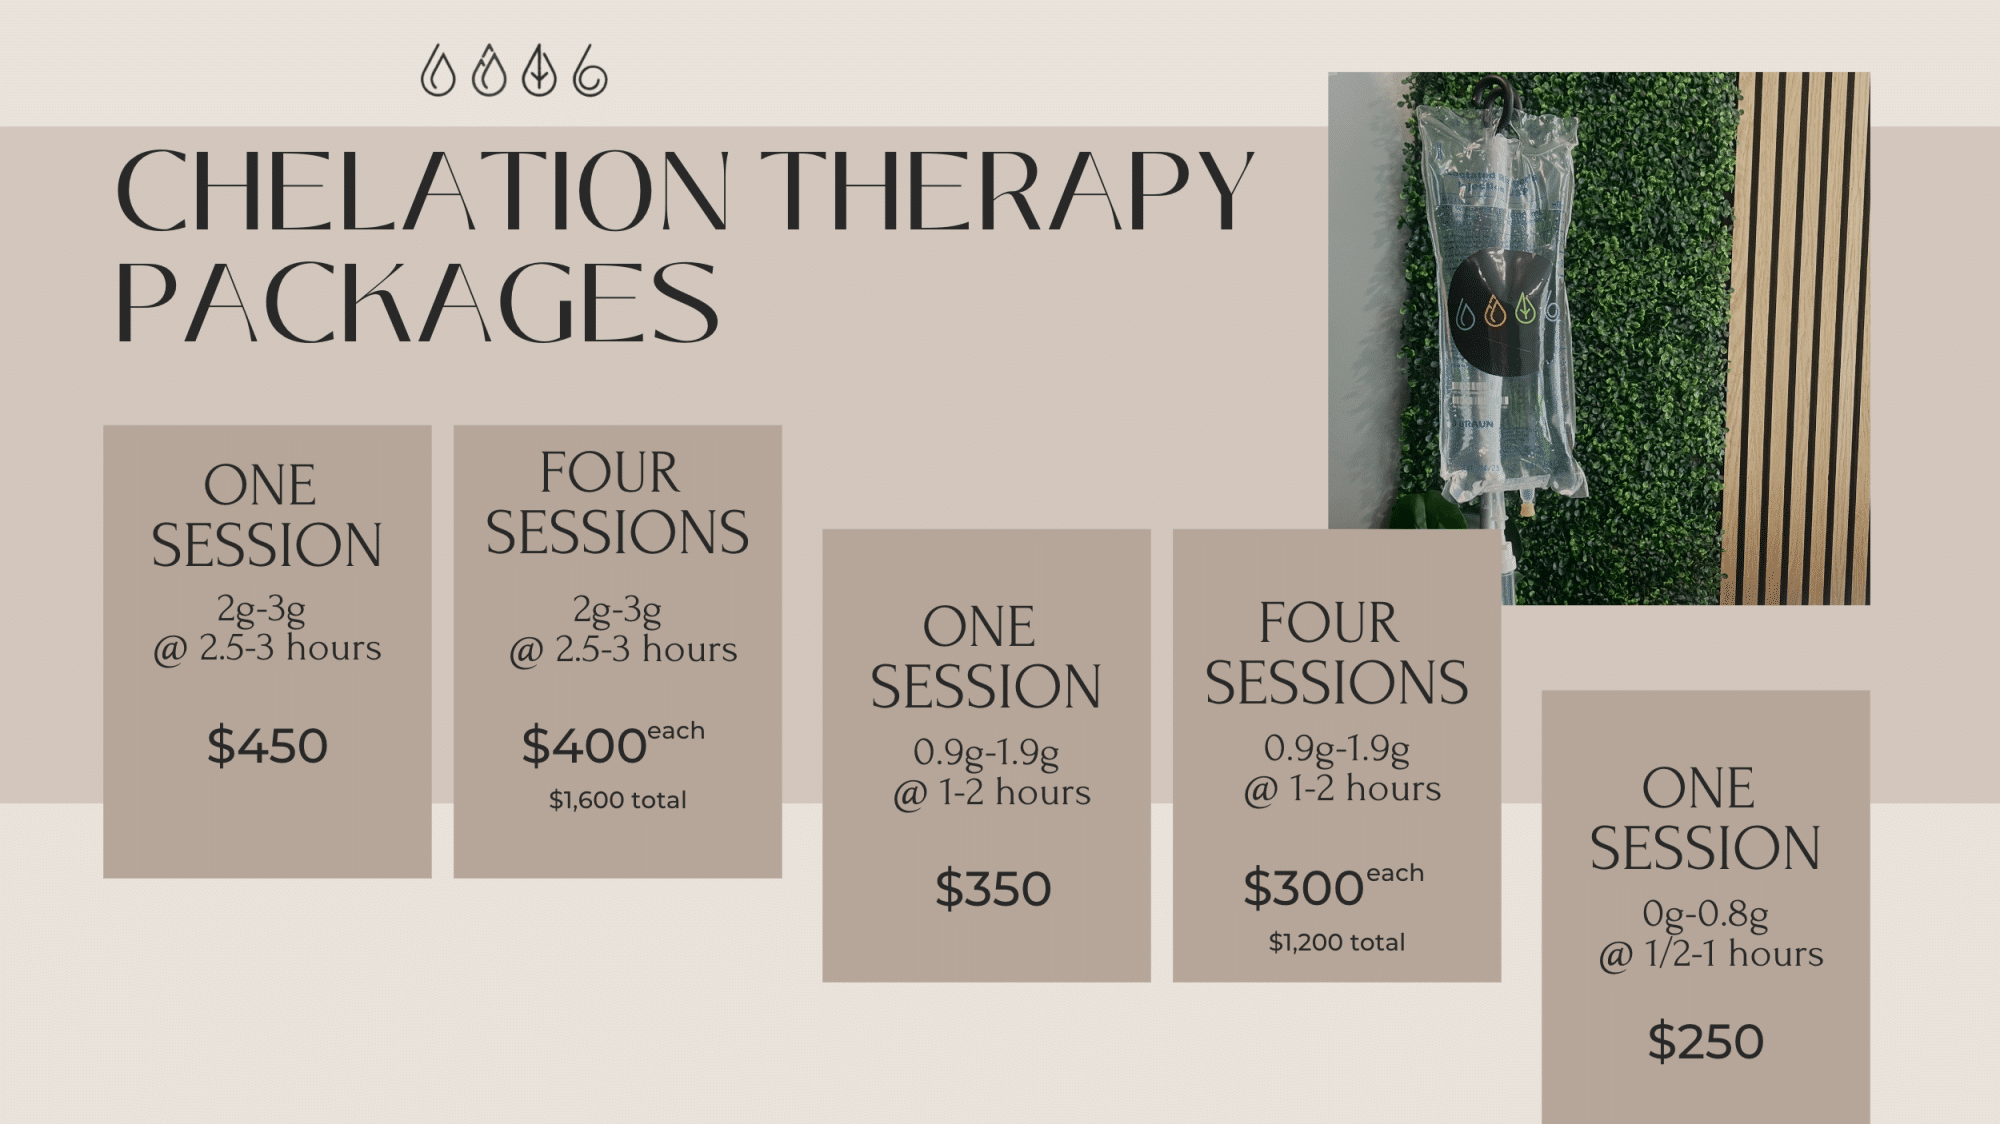 Chelation therapy pricing tiers from IV Elements